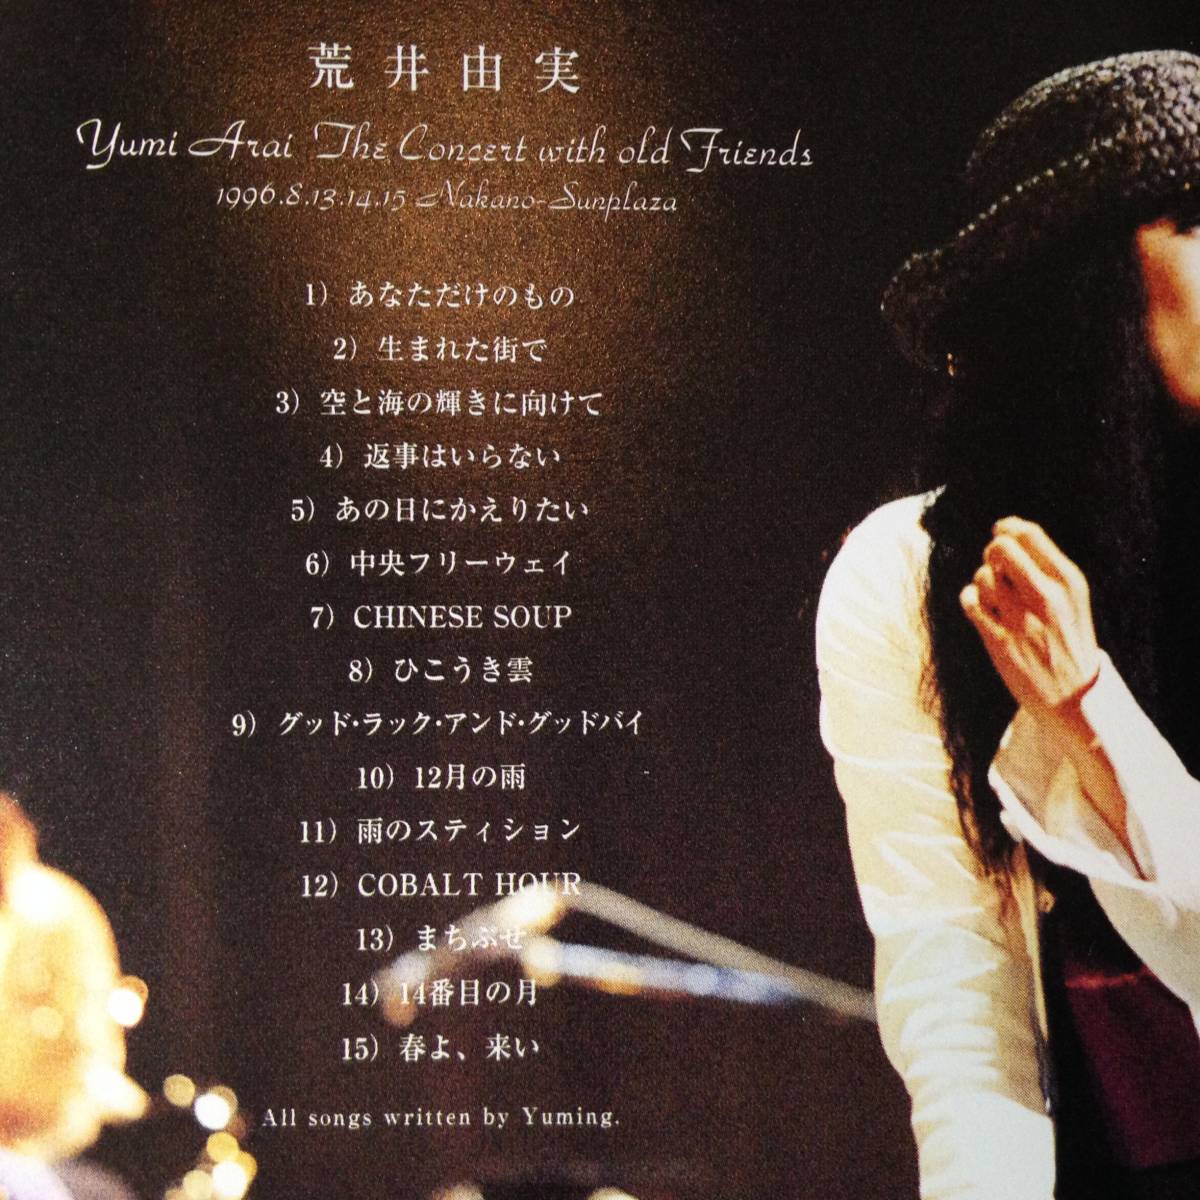 ◆]CD 初回限定盤 荒井由実｜The Concert with old Friends [TOCT-9770]_画像3